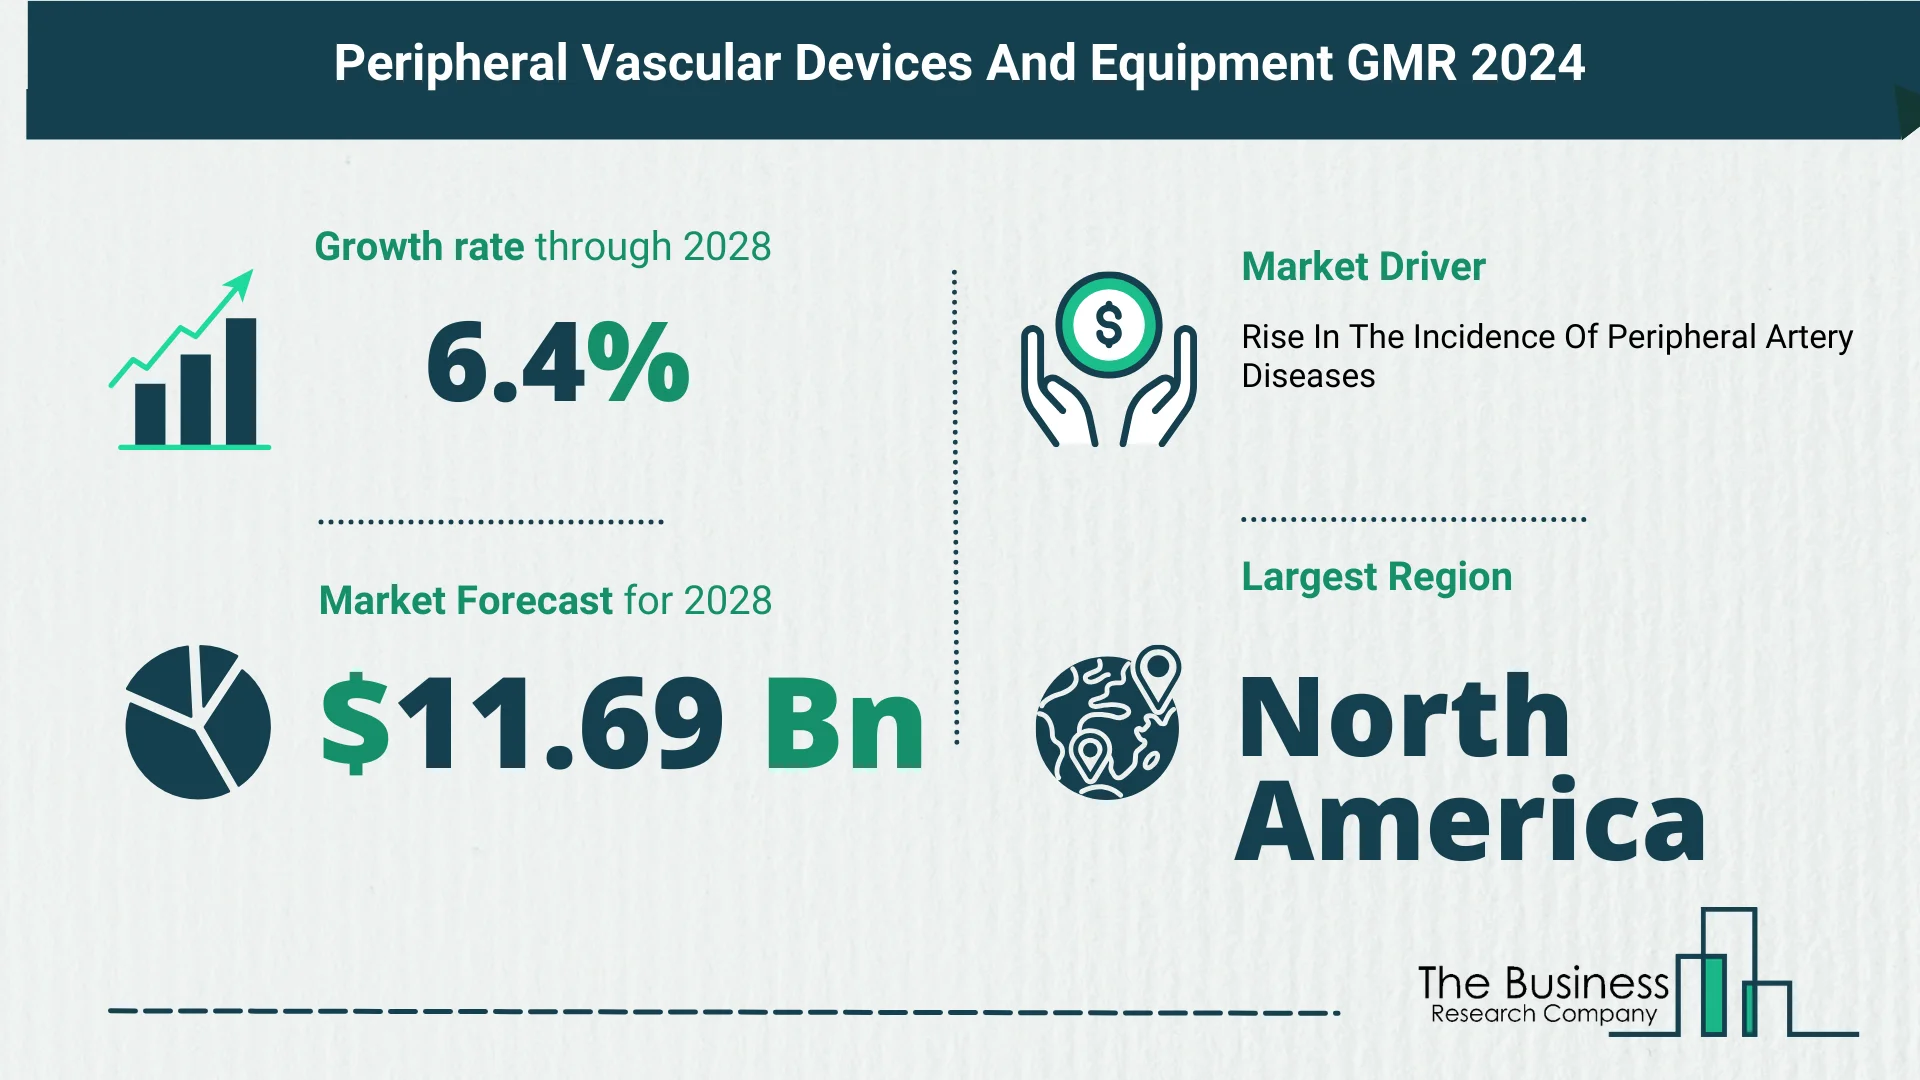 Key Trends And Drivers In The Peripheral Vascular Devices And Equipment Market 2024